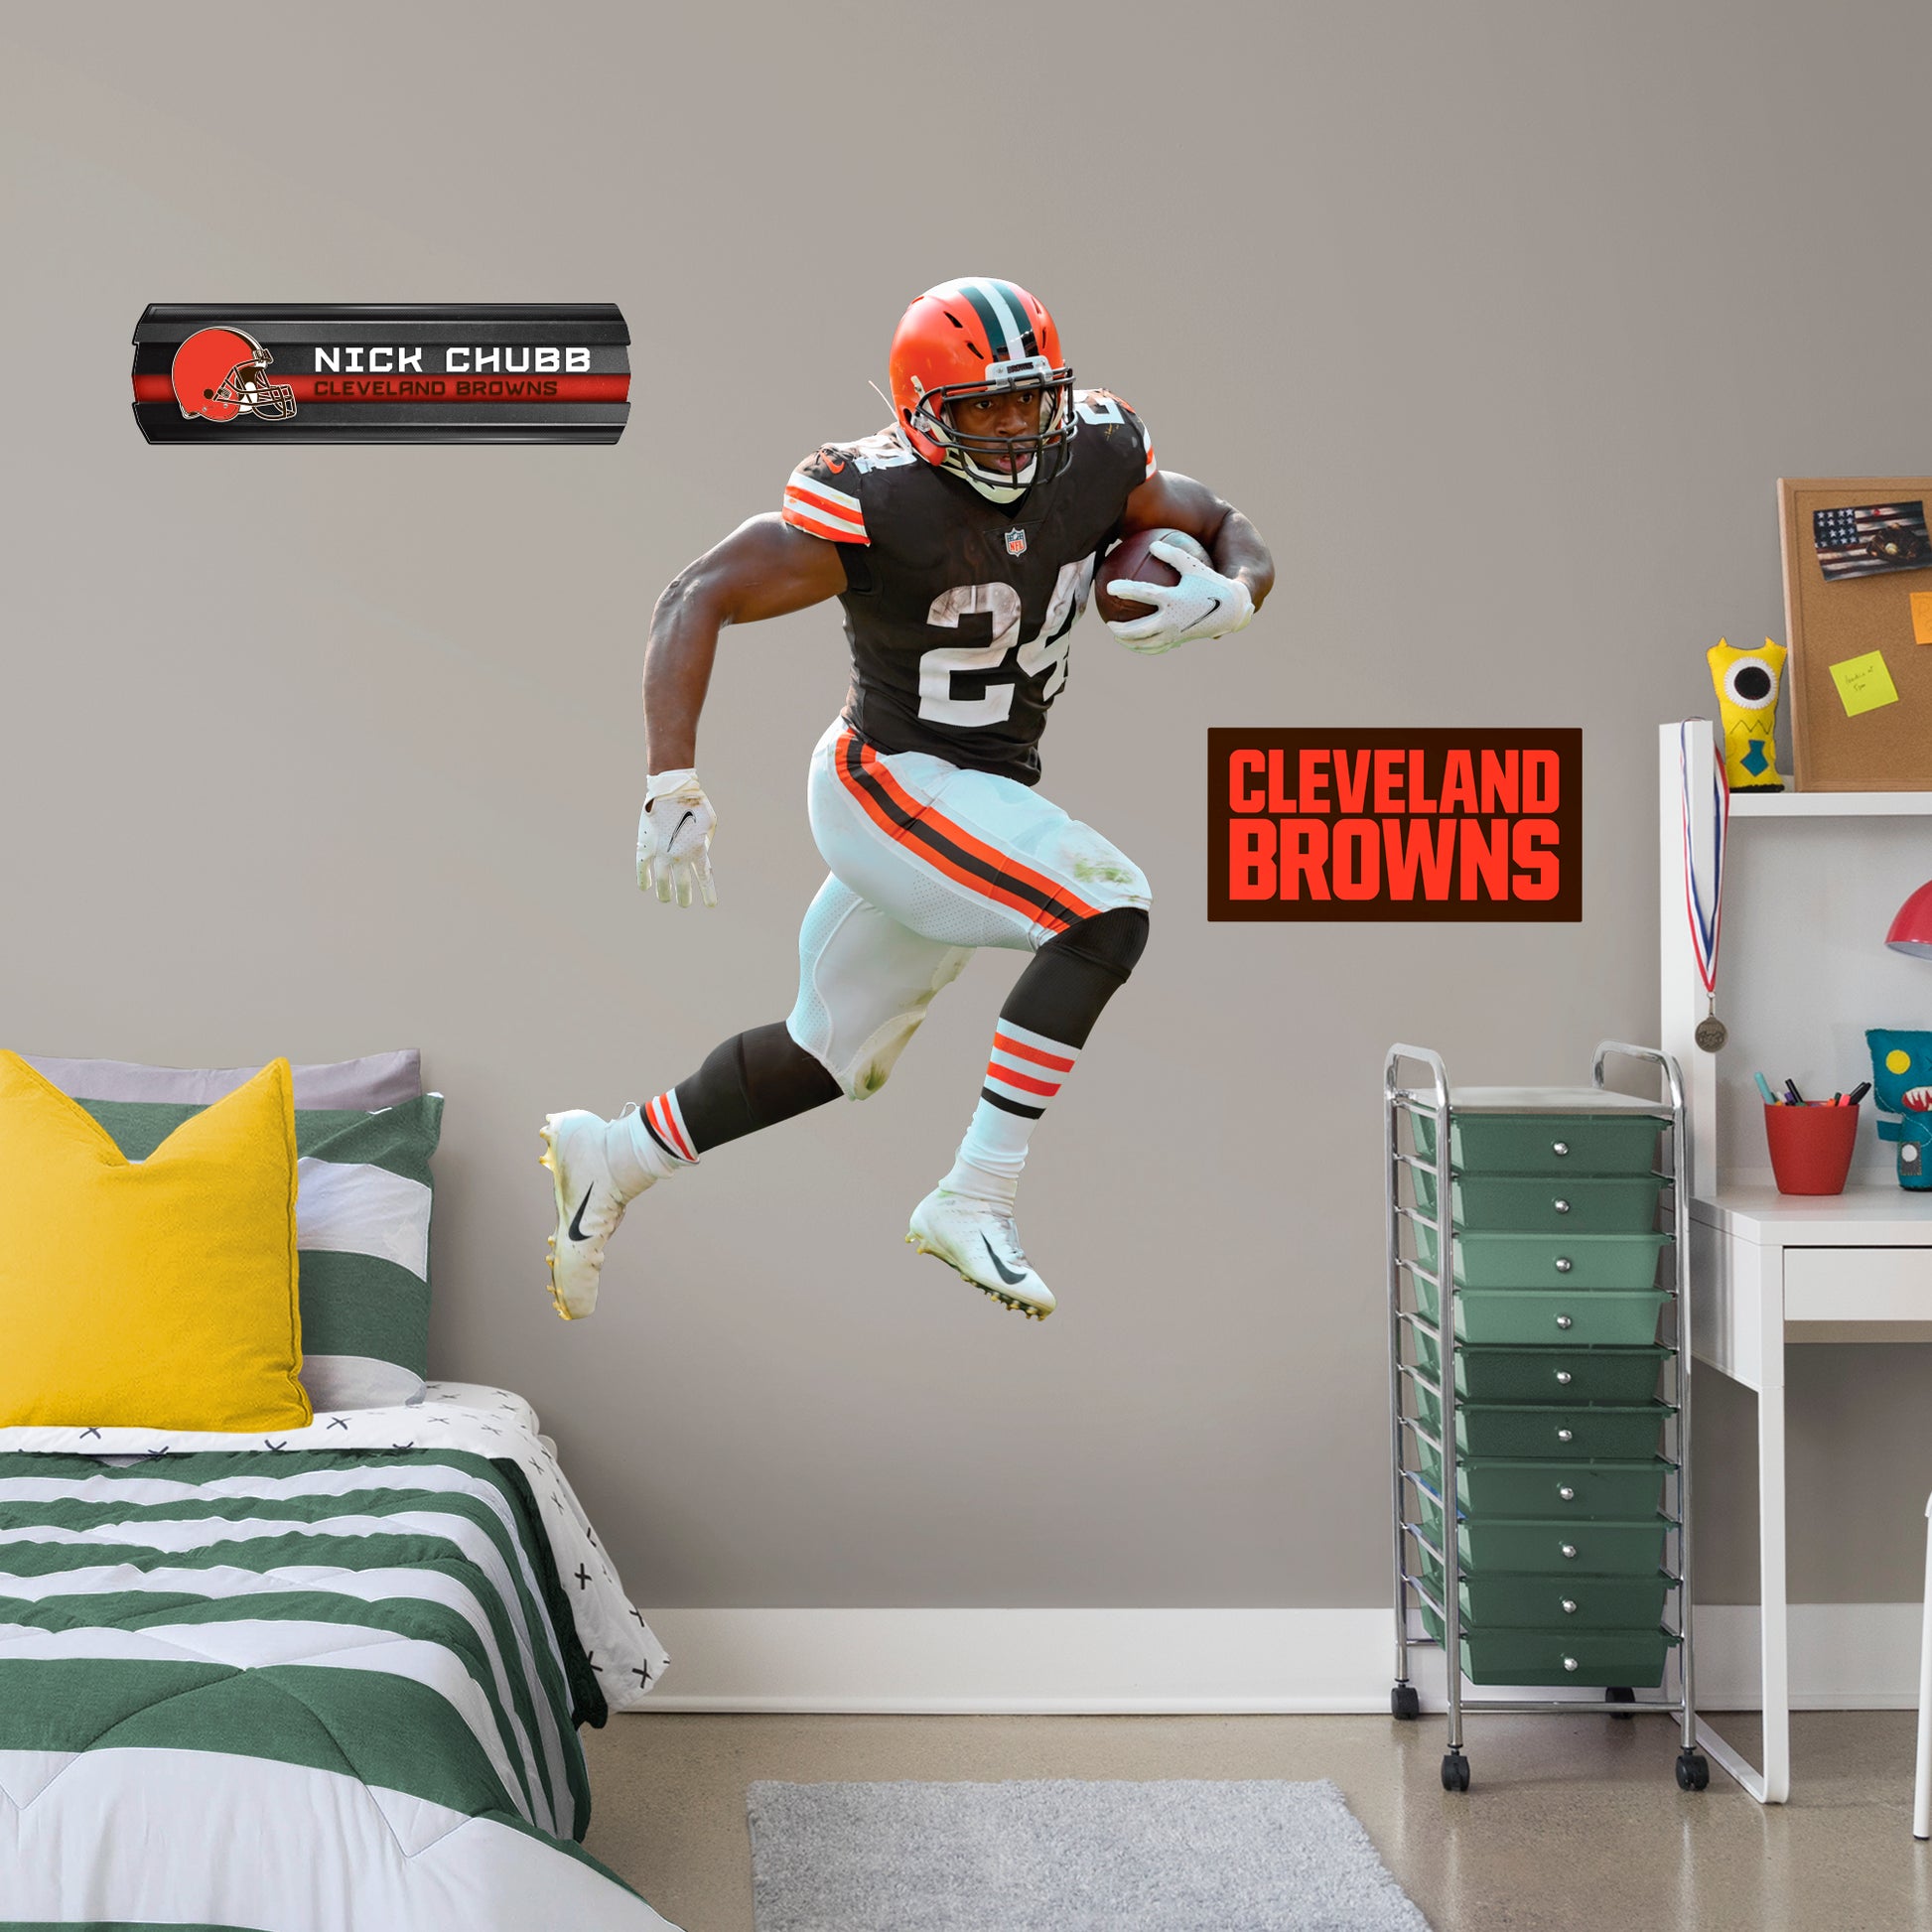 Giant Athlete + 2 Decals Bring the action of the NFL into your home with a wall decal of Nick Chubb! High quality, durable, and tear resistant, you'll be able to stick and move it as many times as you want to create the ultimate football experience in any room!